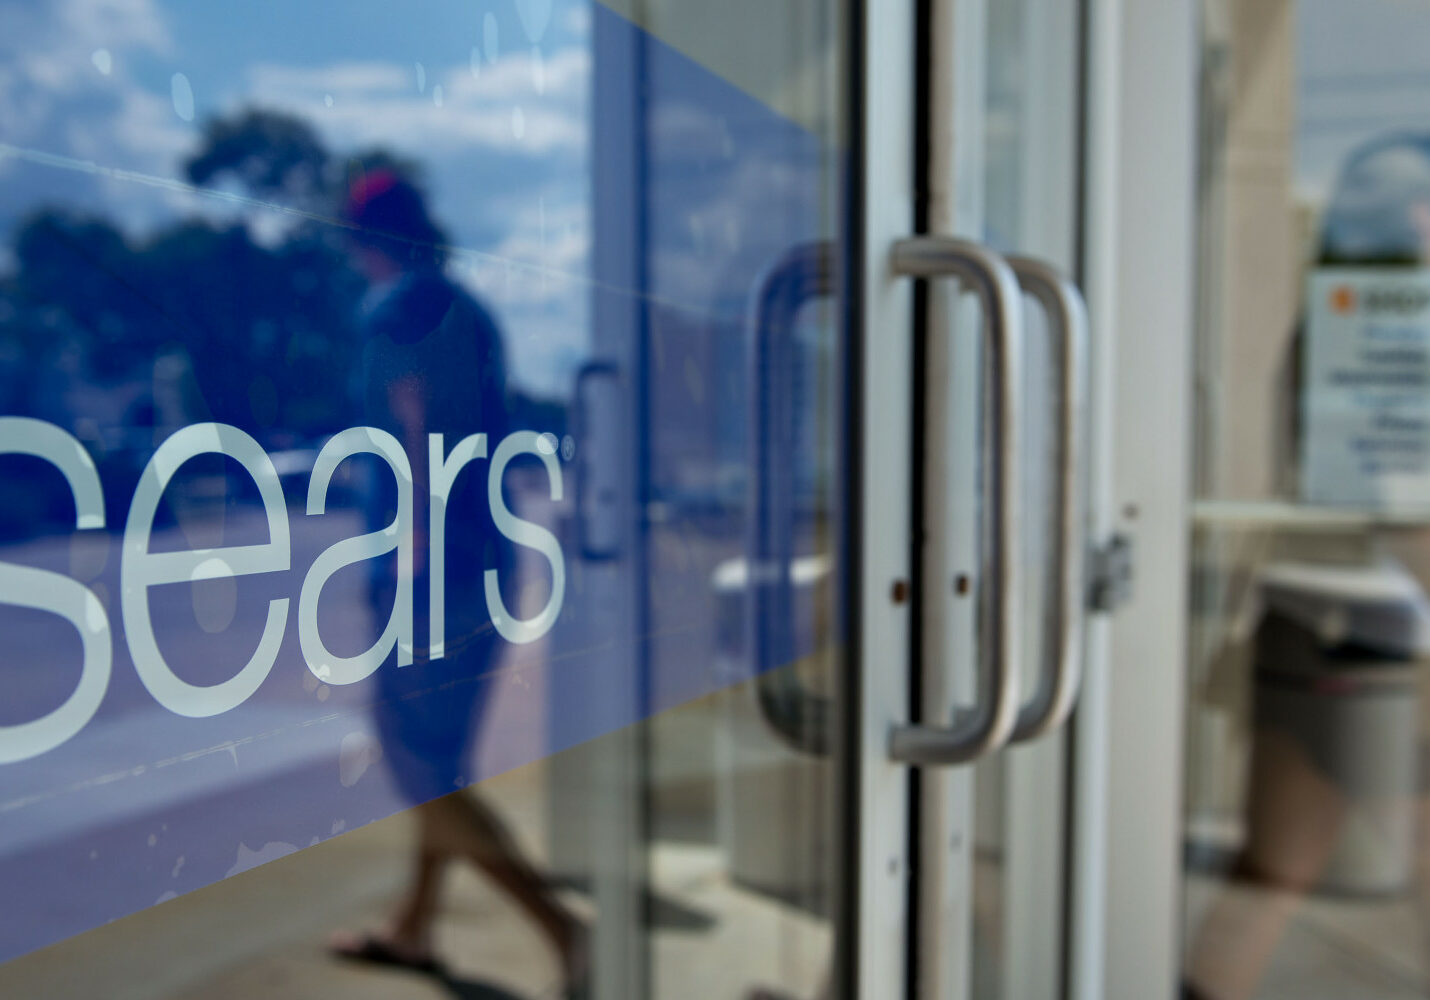 A shopper exits a Sears store in Peoria, Illinois, U.S., on Friday, Aug. 16, 2013. Sears Holdings Corp. is scheduled to release second quarter earnings on Aug. 22. Photographer: Daniel Acker/Bloomberg via Getty Images